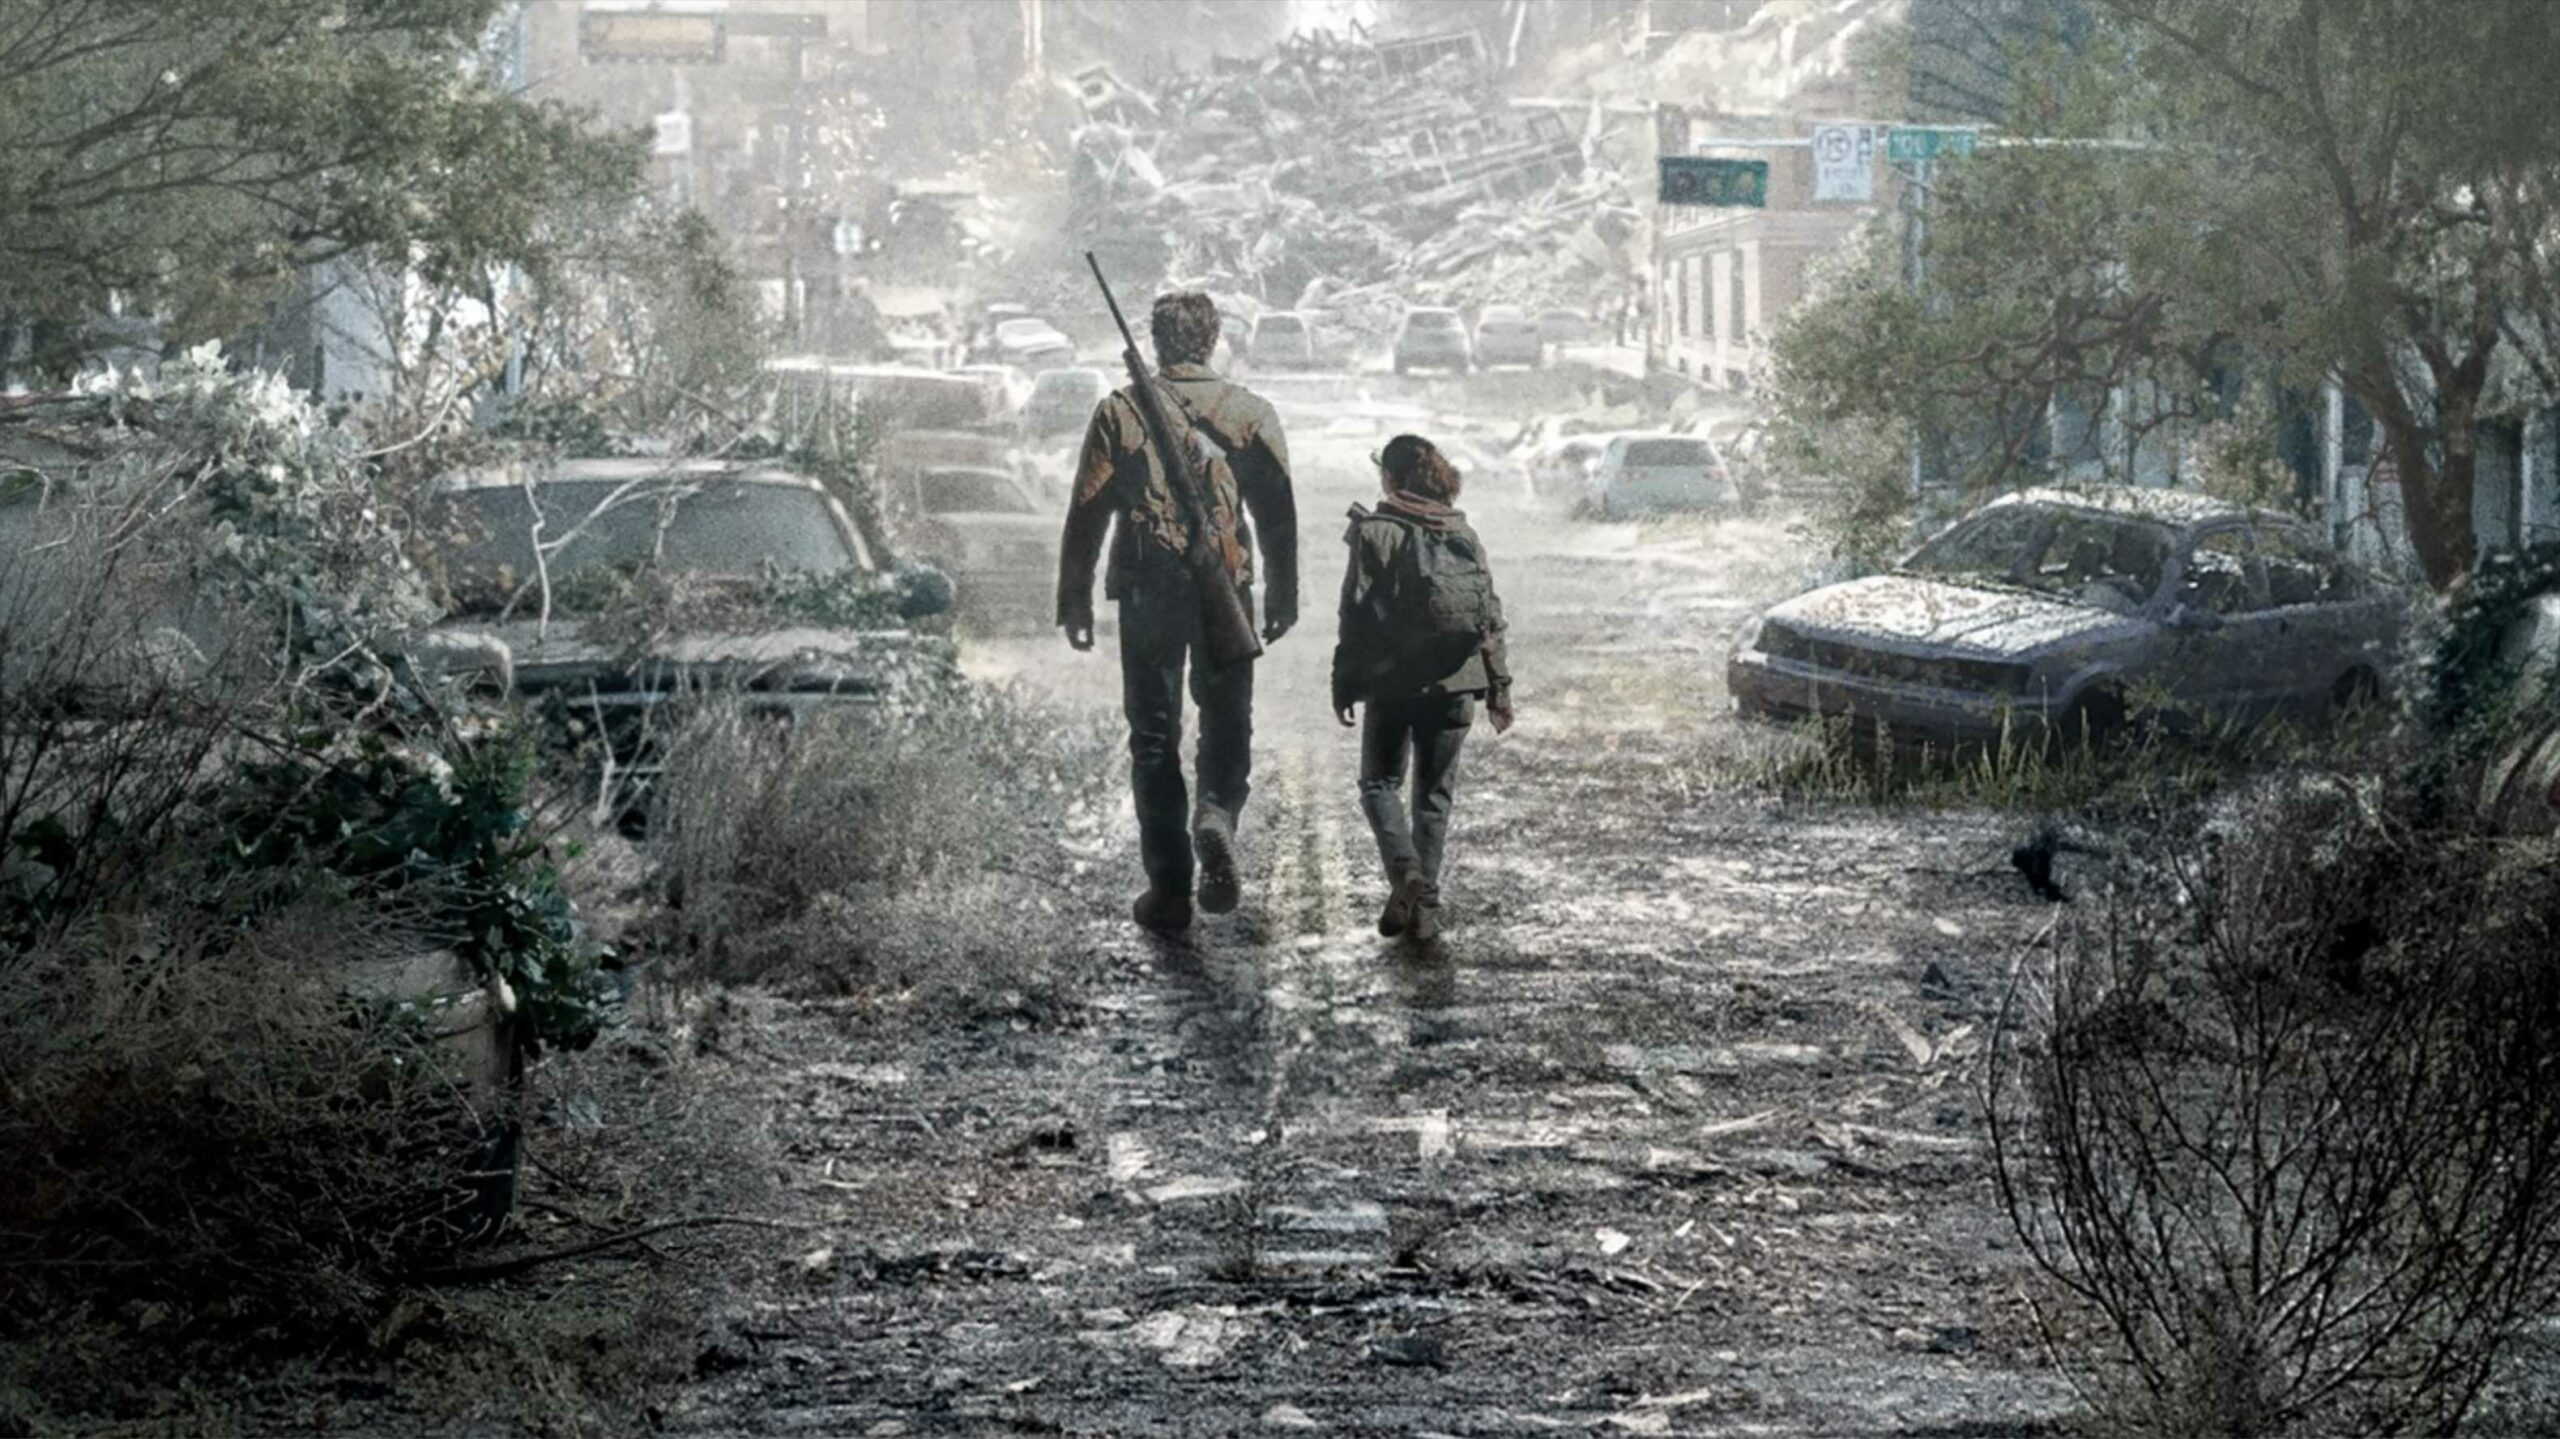 The Last of Us on X: To the edge of the universe and back. #TheLastOfUs  premieres January 15 on @HBOMax.  / X